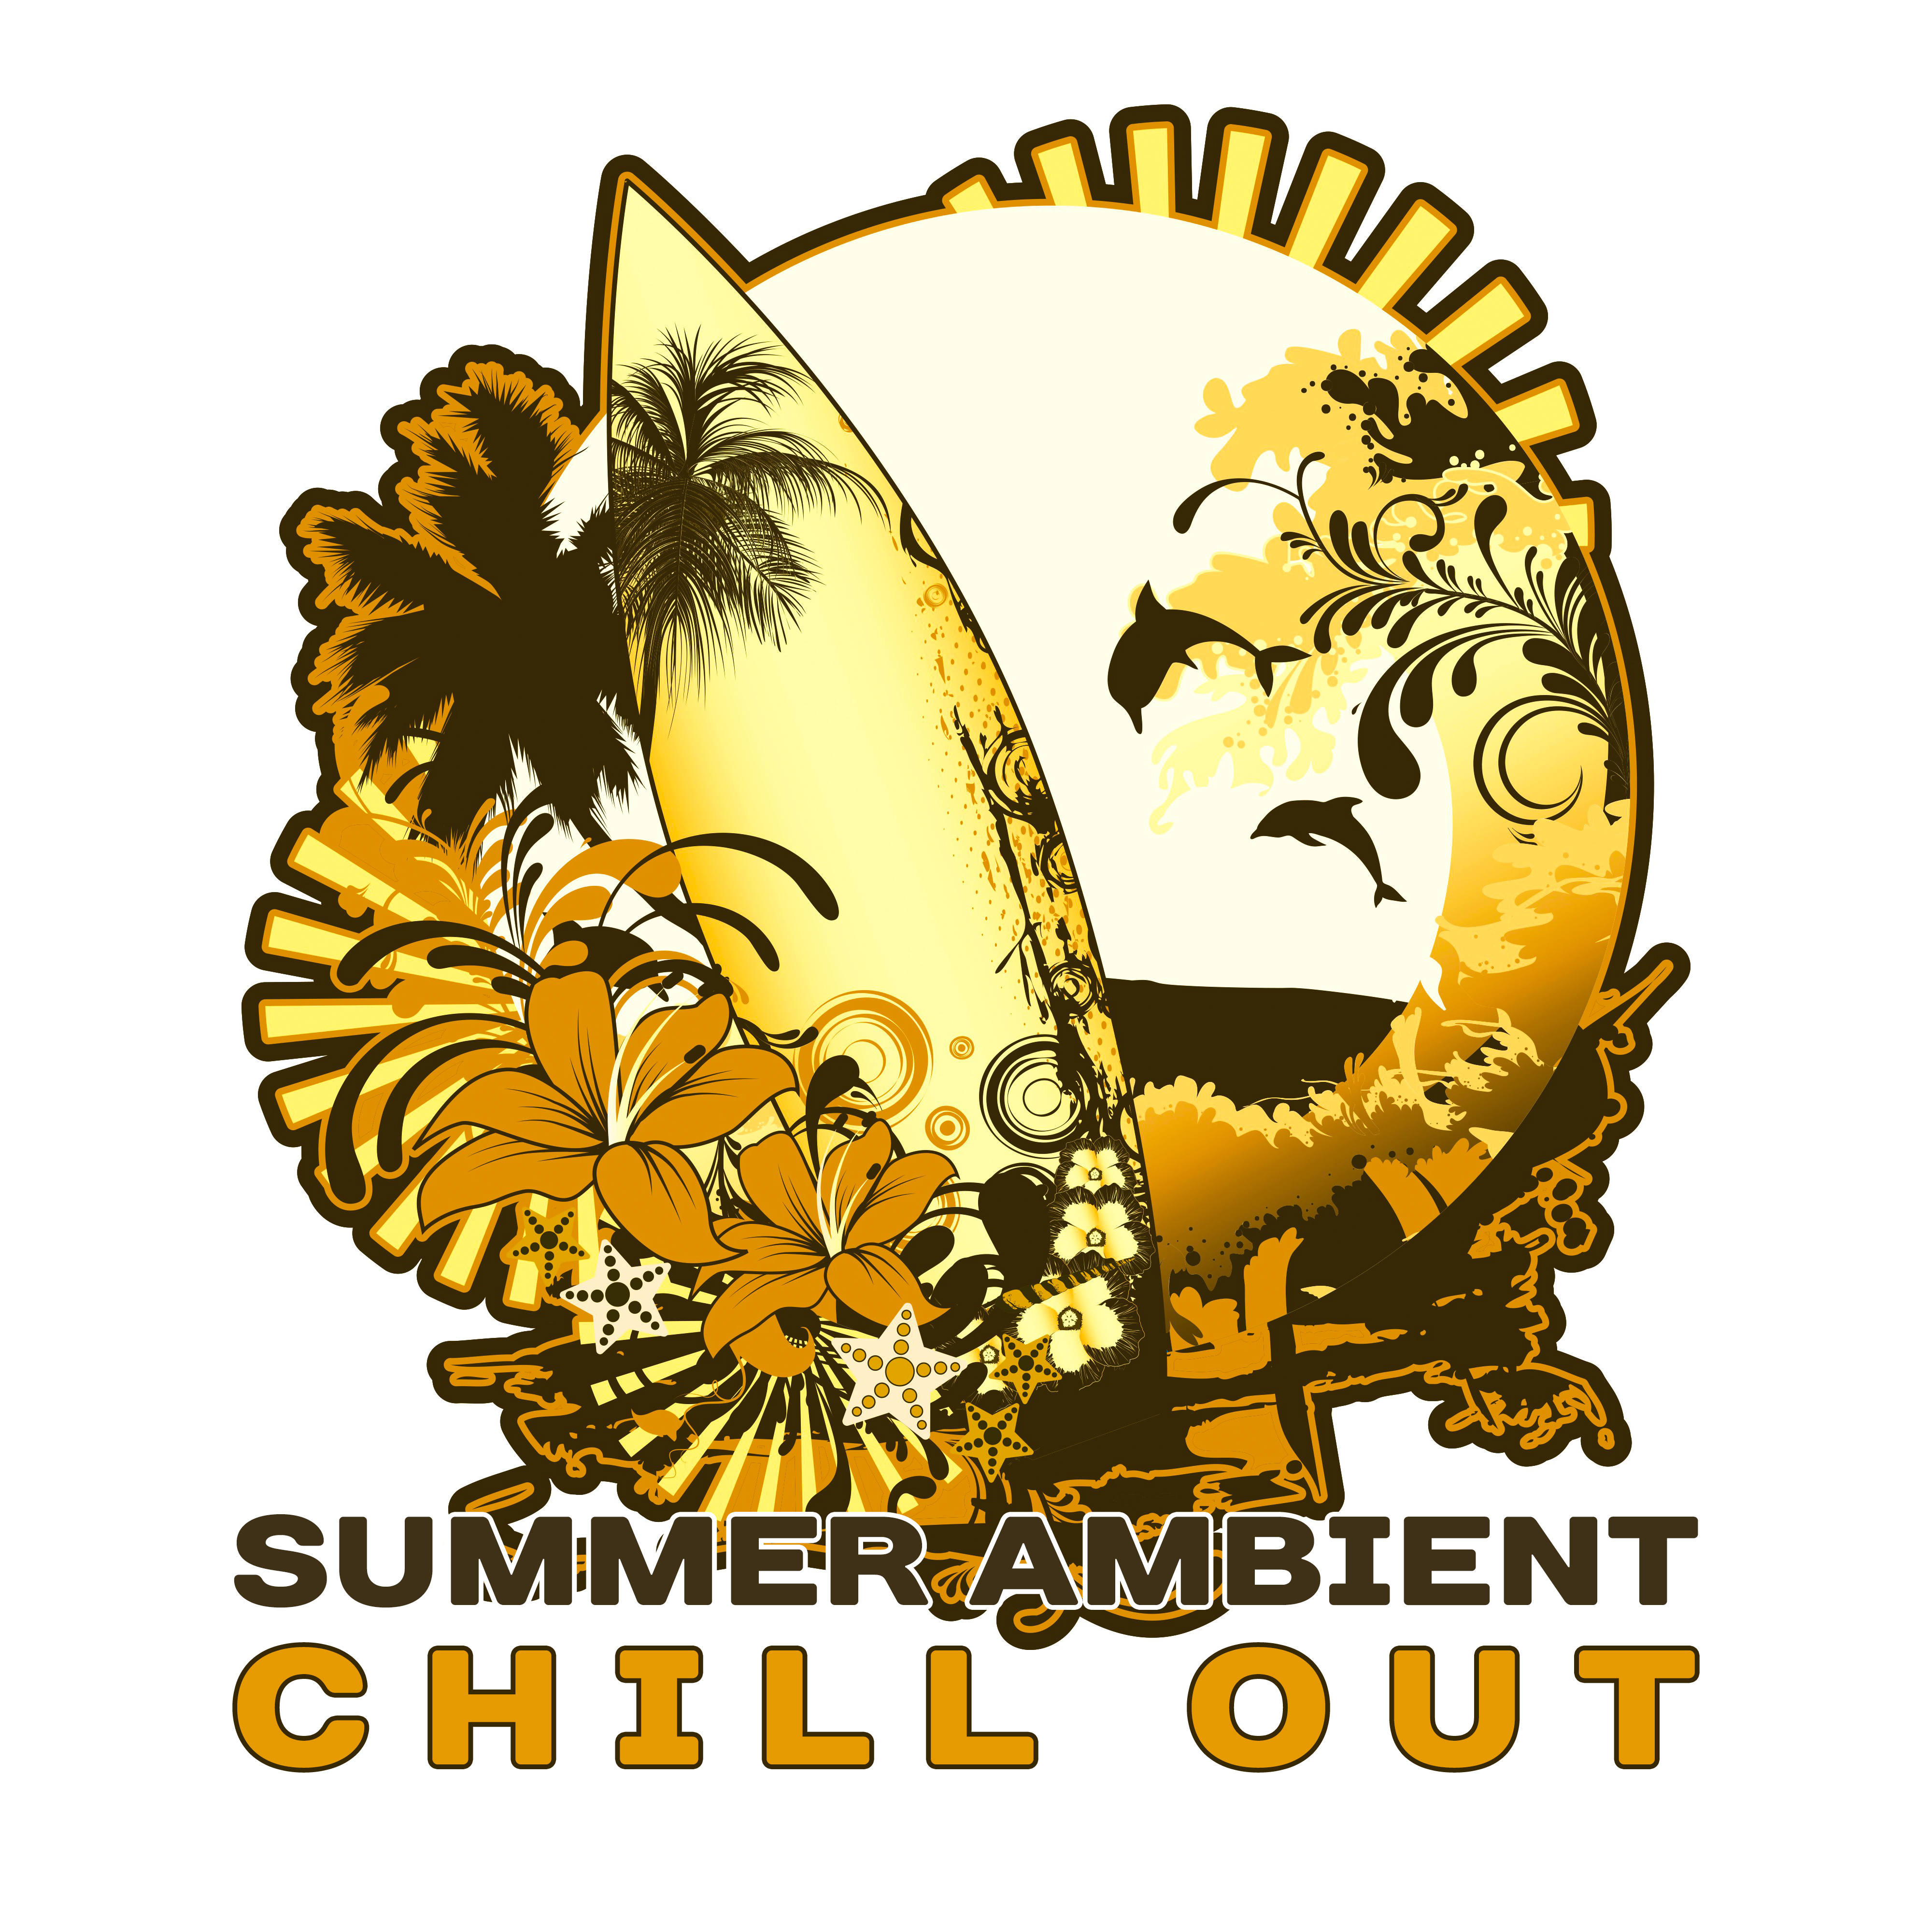 Summer Ambient Chill Out – Holiday Relaxation, Rest with Chill Out Sounds, Music to Calm Down, Summer 2017